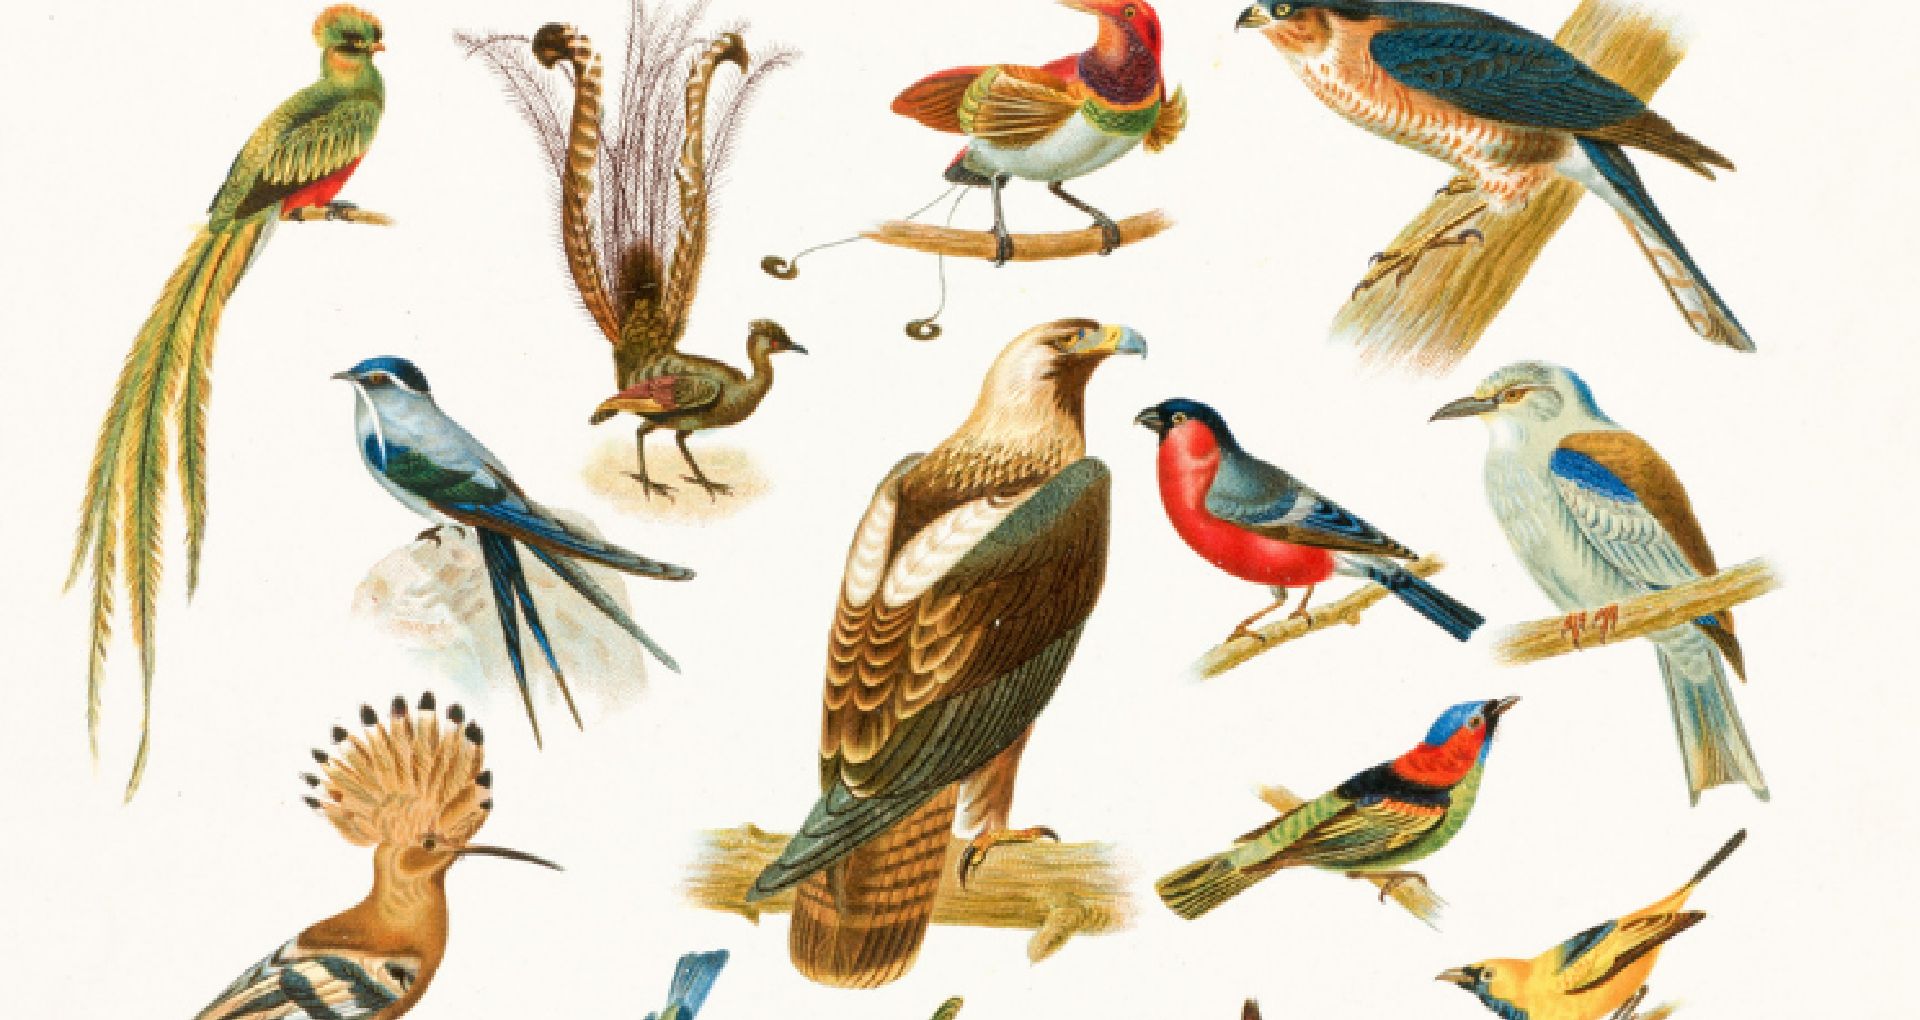 Drawings of many different kinds of birds of different types and colored feathers laid out on a page.